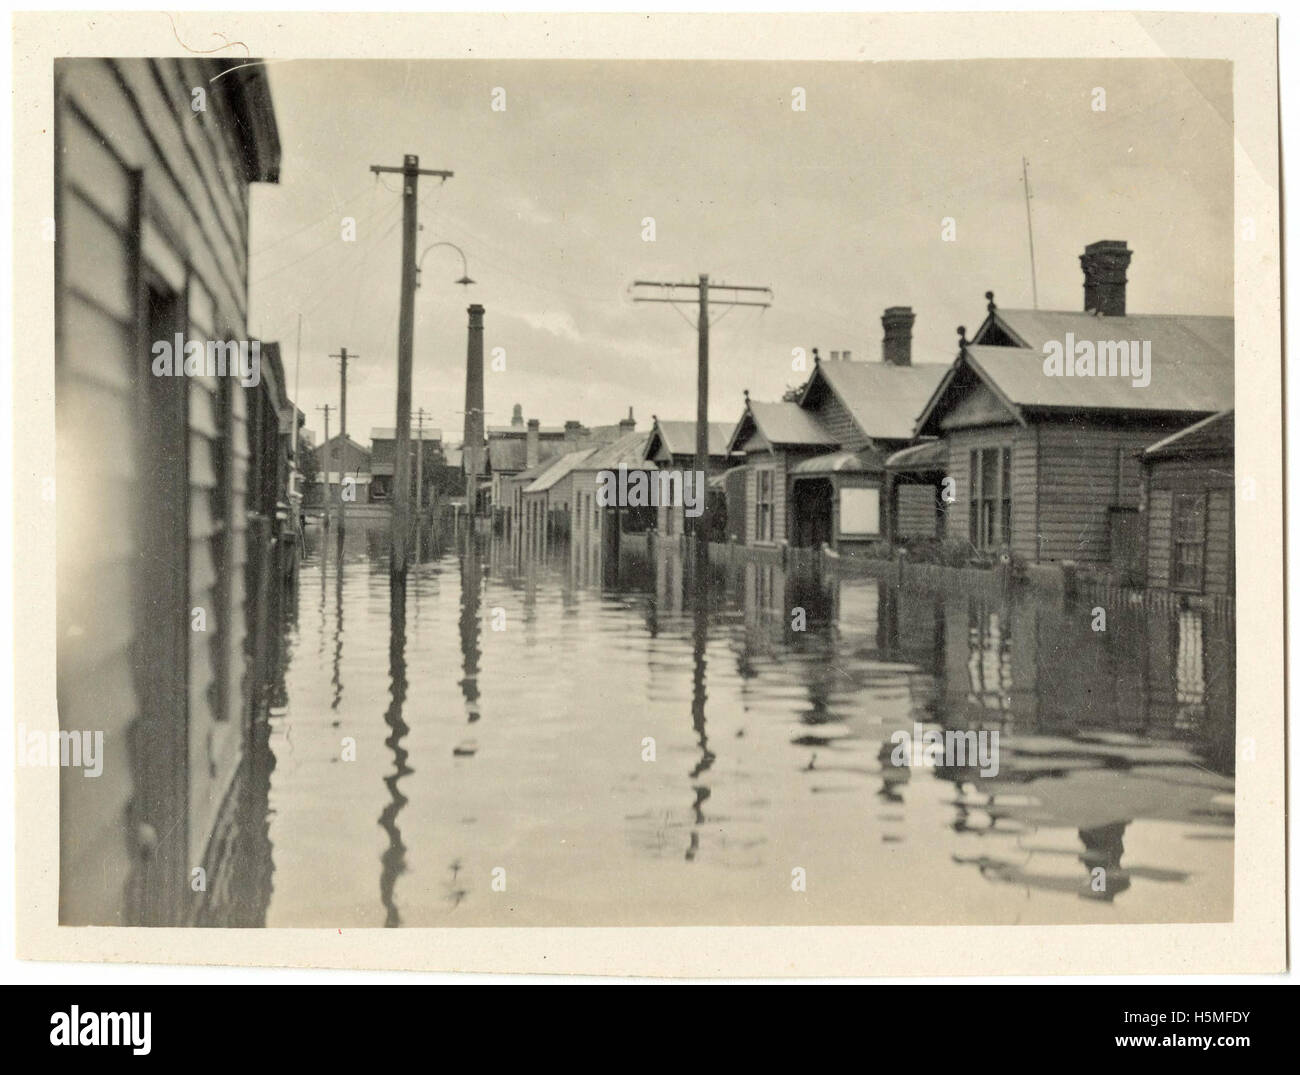 Flooded street and houses, possibly Goodwin Street, Invermay (1929) Stock Photo